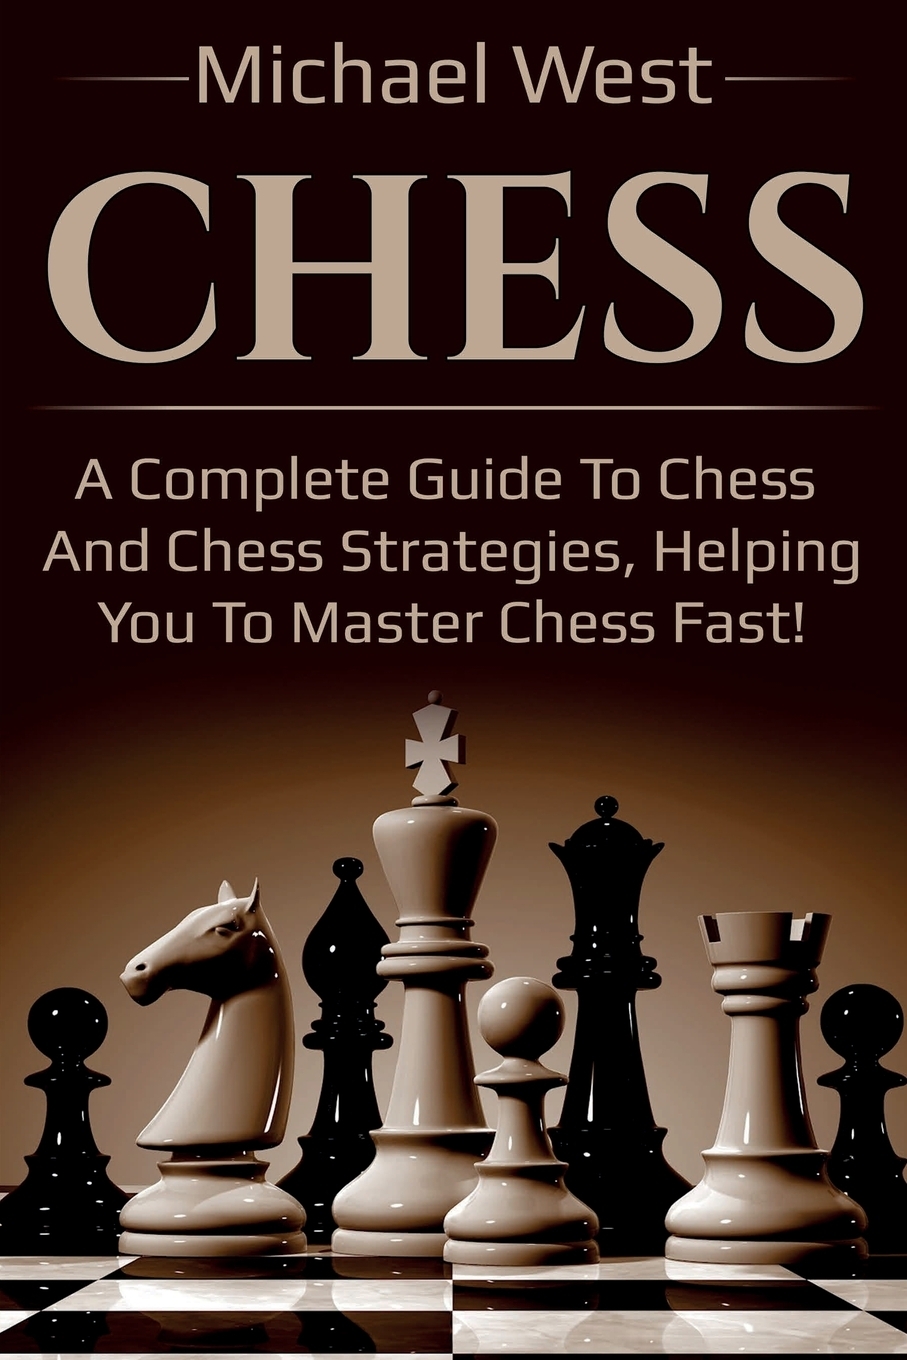 Chess books. Amazon Chess. Chess Master vacancy. Chess book inside. Complete book of Chess.